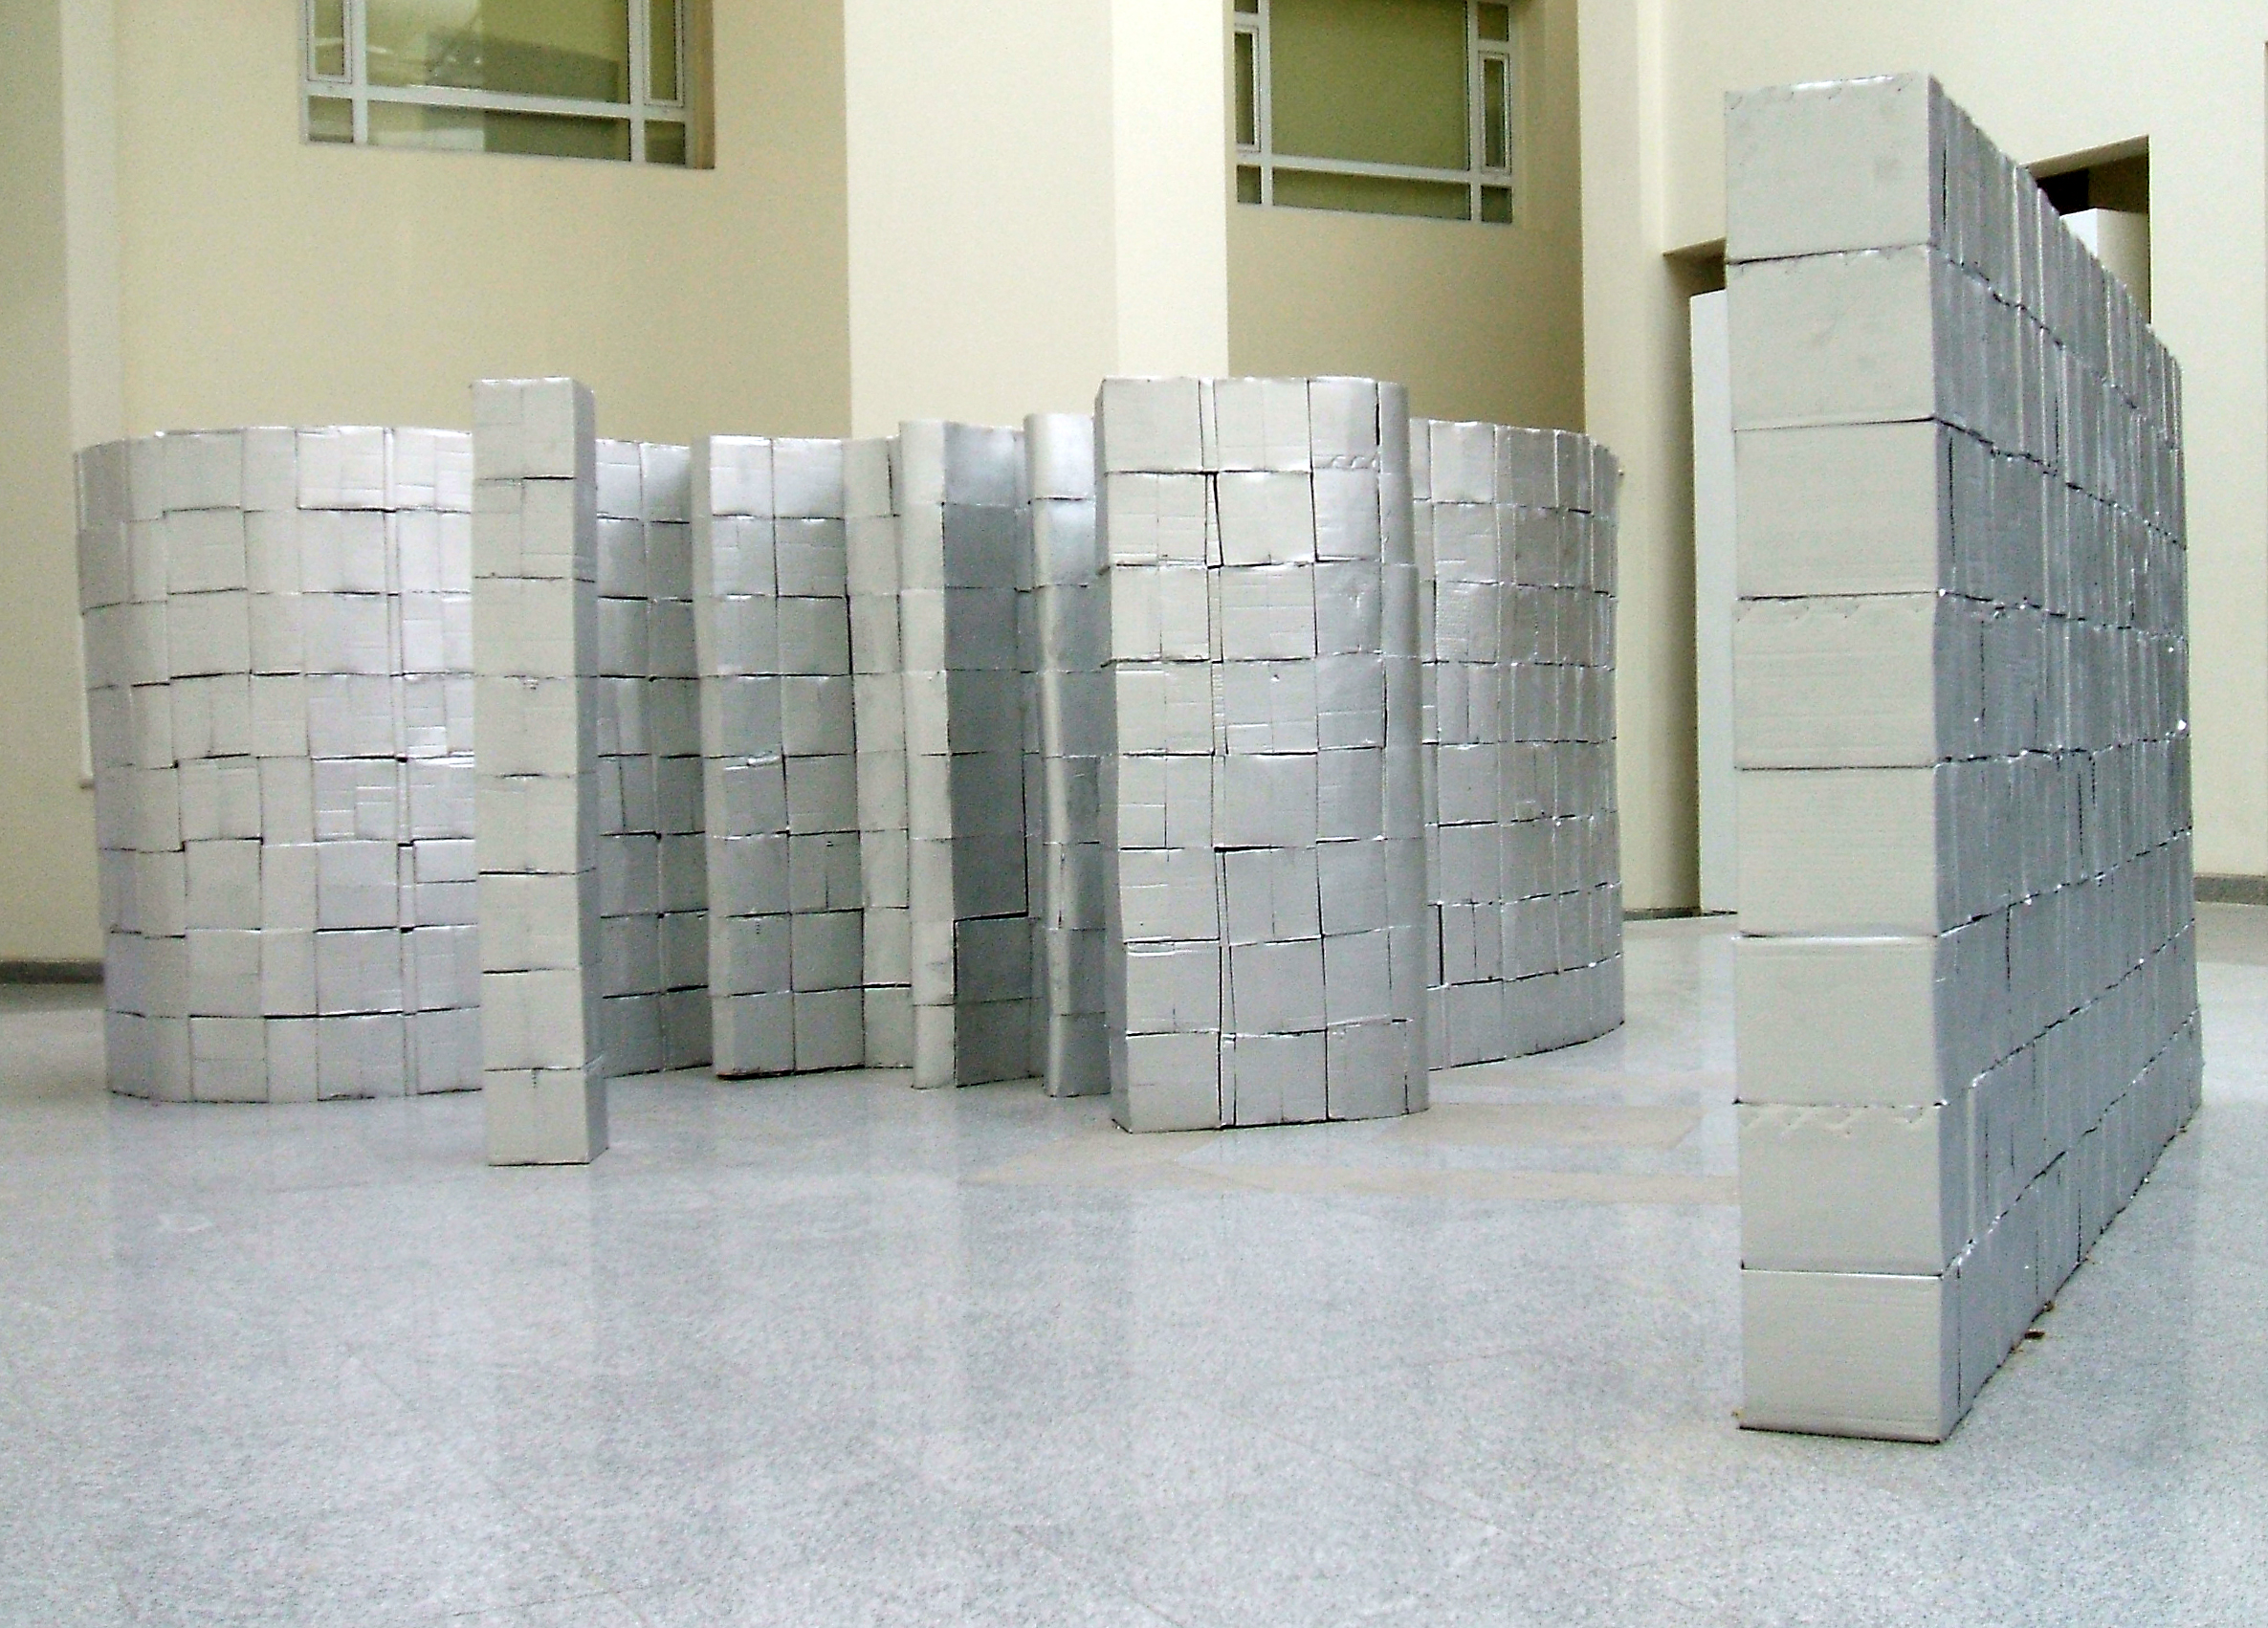  Sona El Seen - Made in China, 2009, 1500 Cardboard boxes construction silver colour, 1200 x 80 x 180 cm. Courtesy of the artist and Gypsum Gallery. 